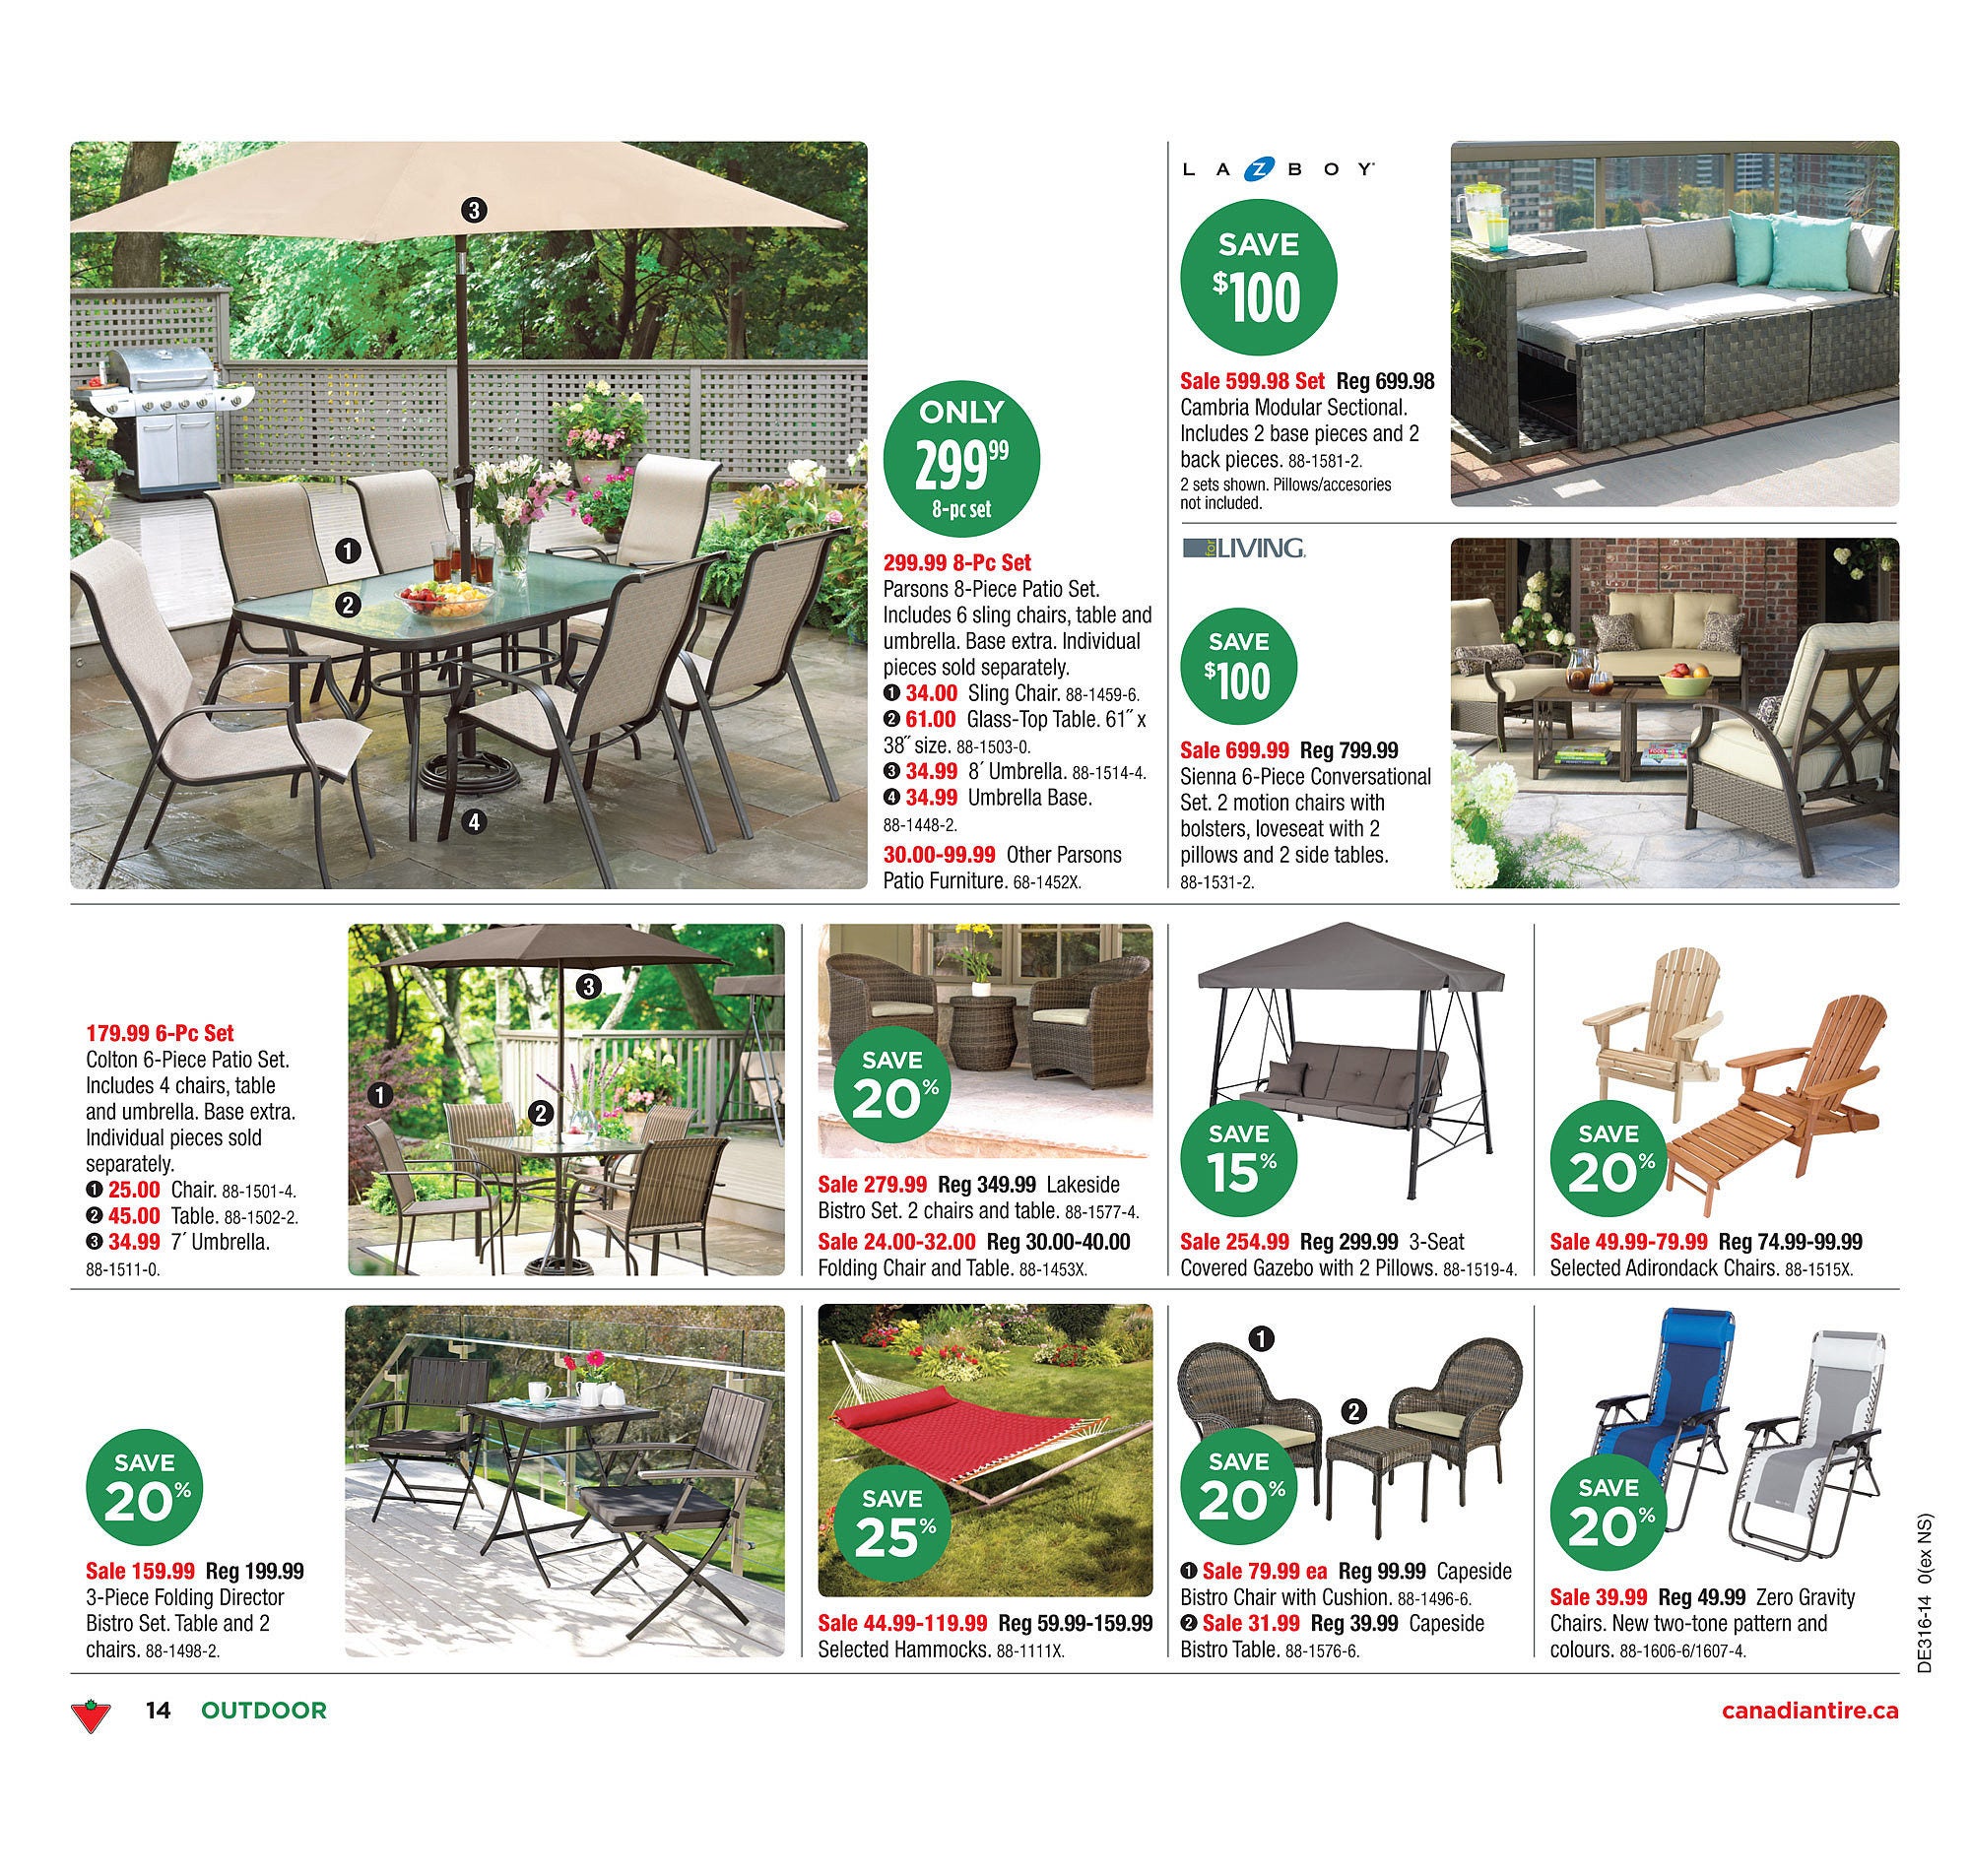 Canadian Tire Weekly Flyer Weekly Flyer Apr 10 17